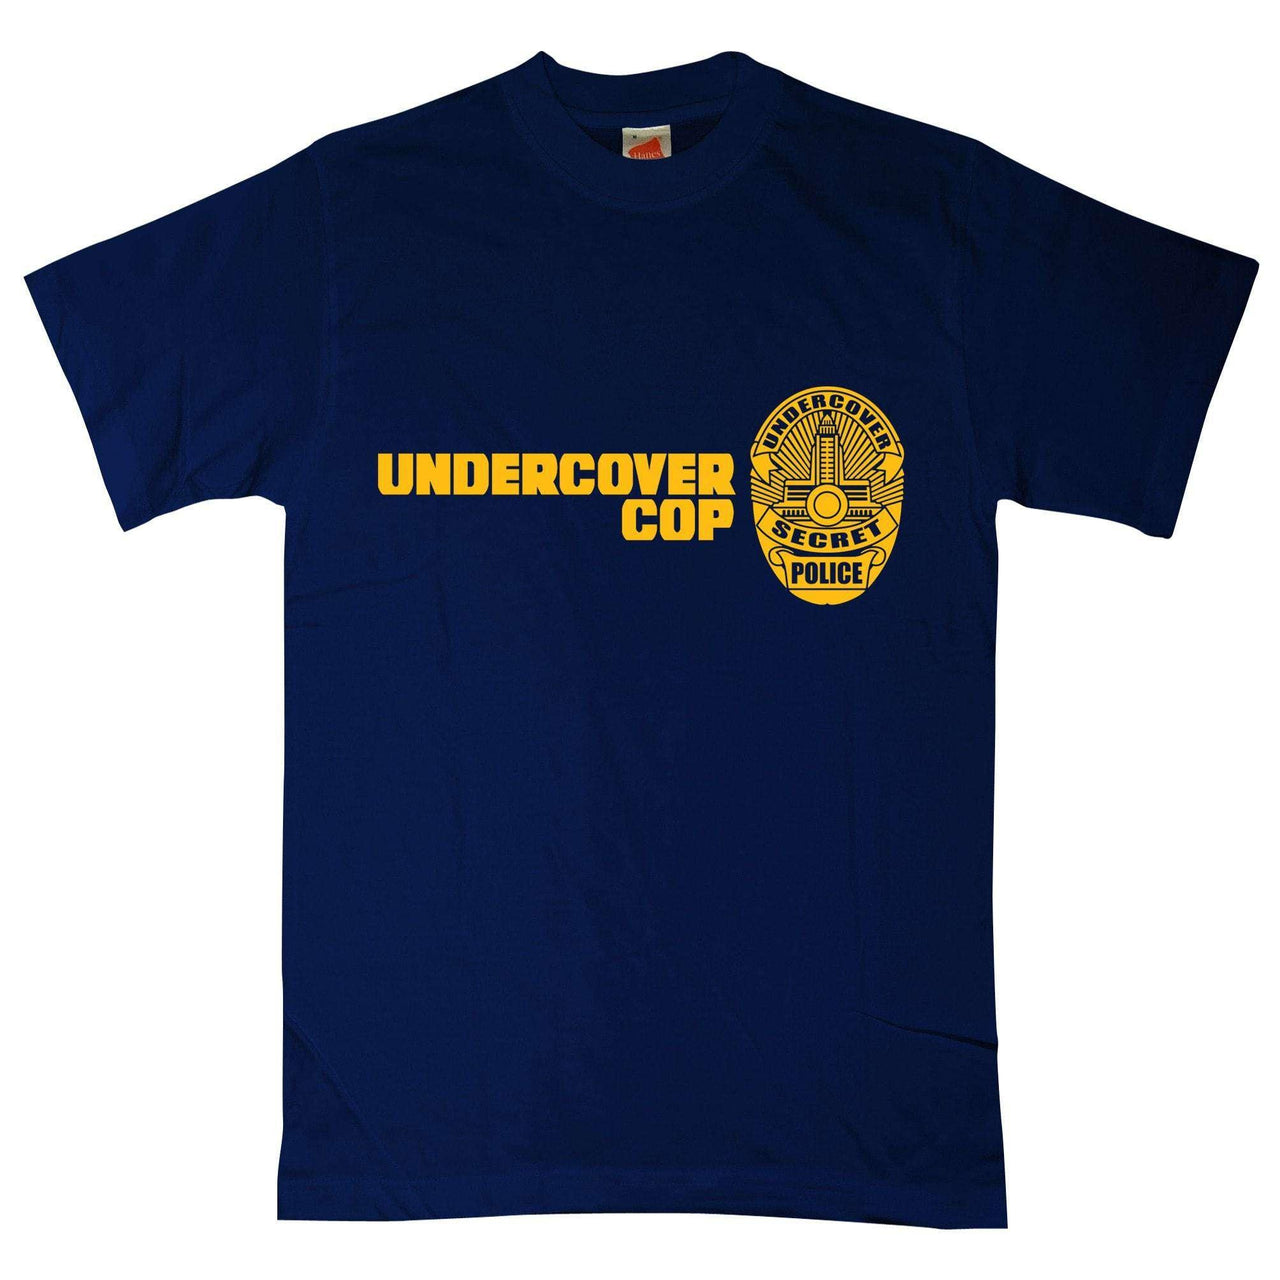 Undercover Cop Graphic T-Shirt For Men 8Ball